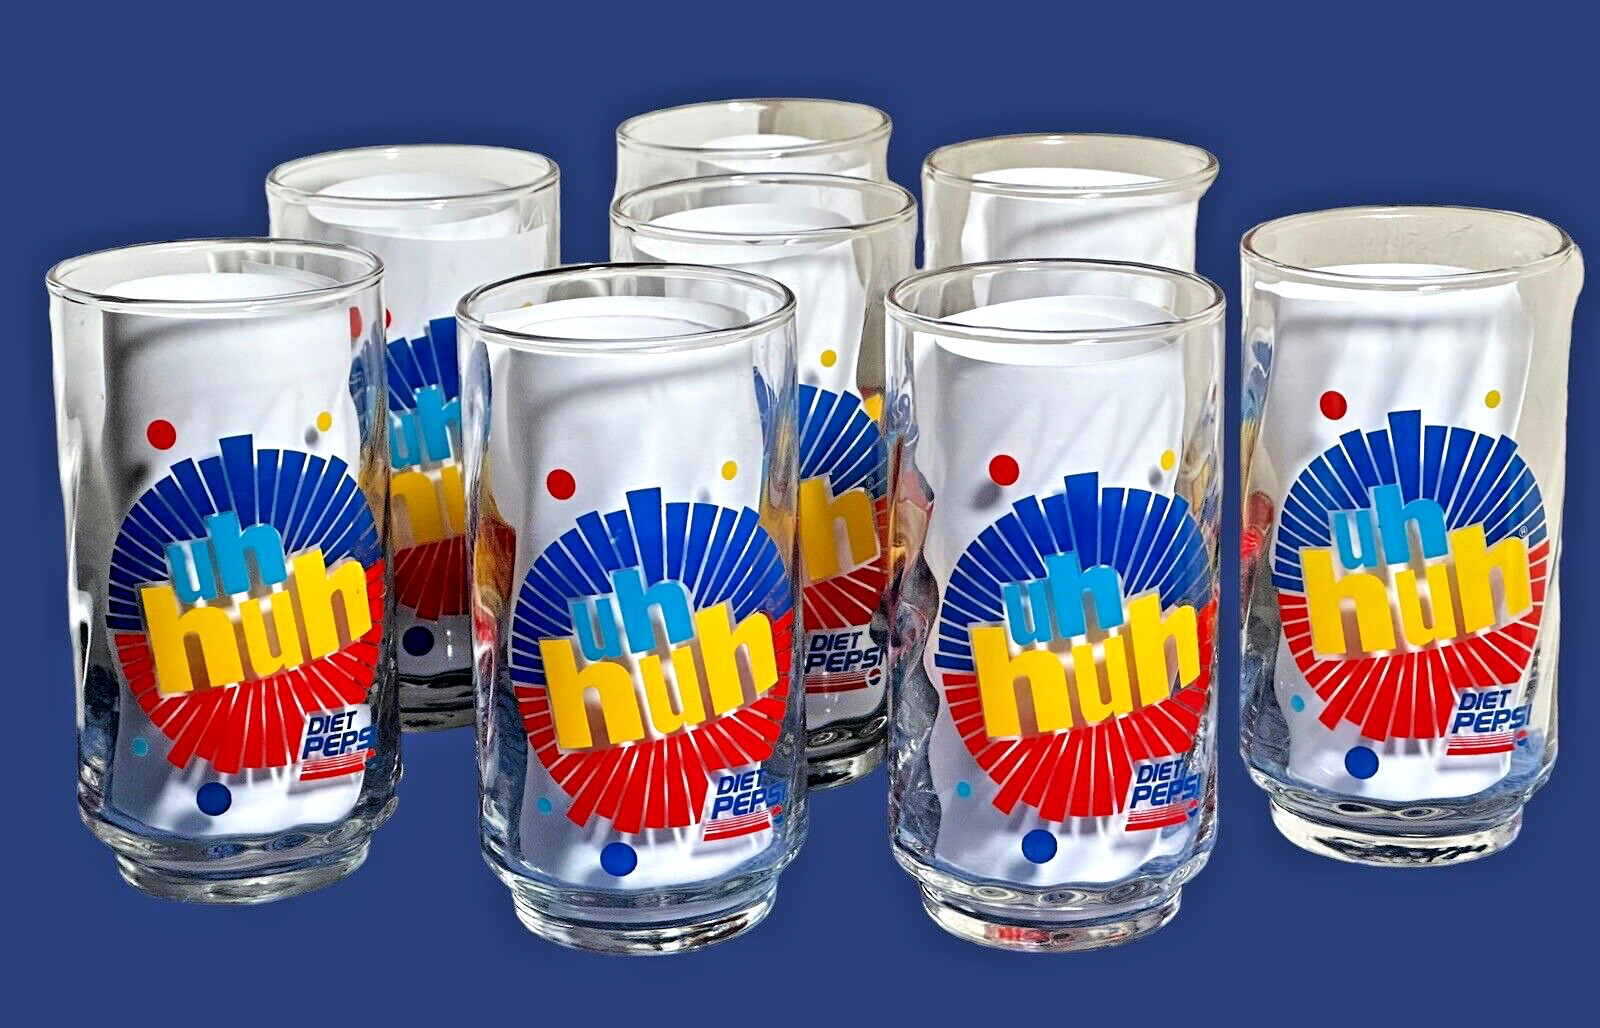 8 DIET PEPSI Glasses You Got The Right One Baby Uh Huh Ray Charles 12-oz c. 1991